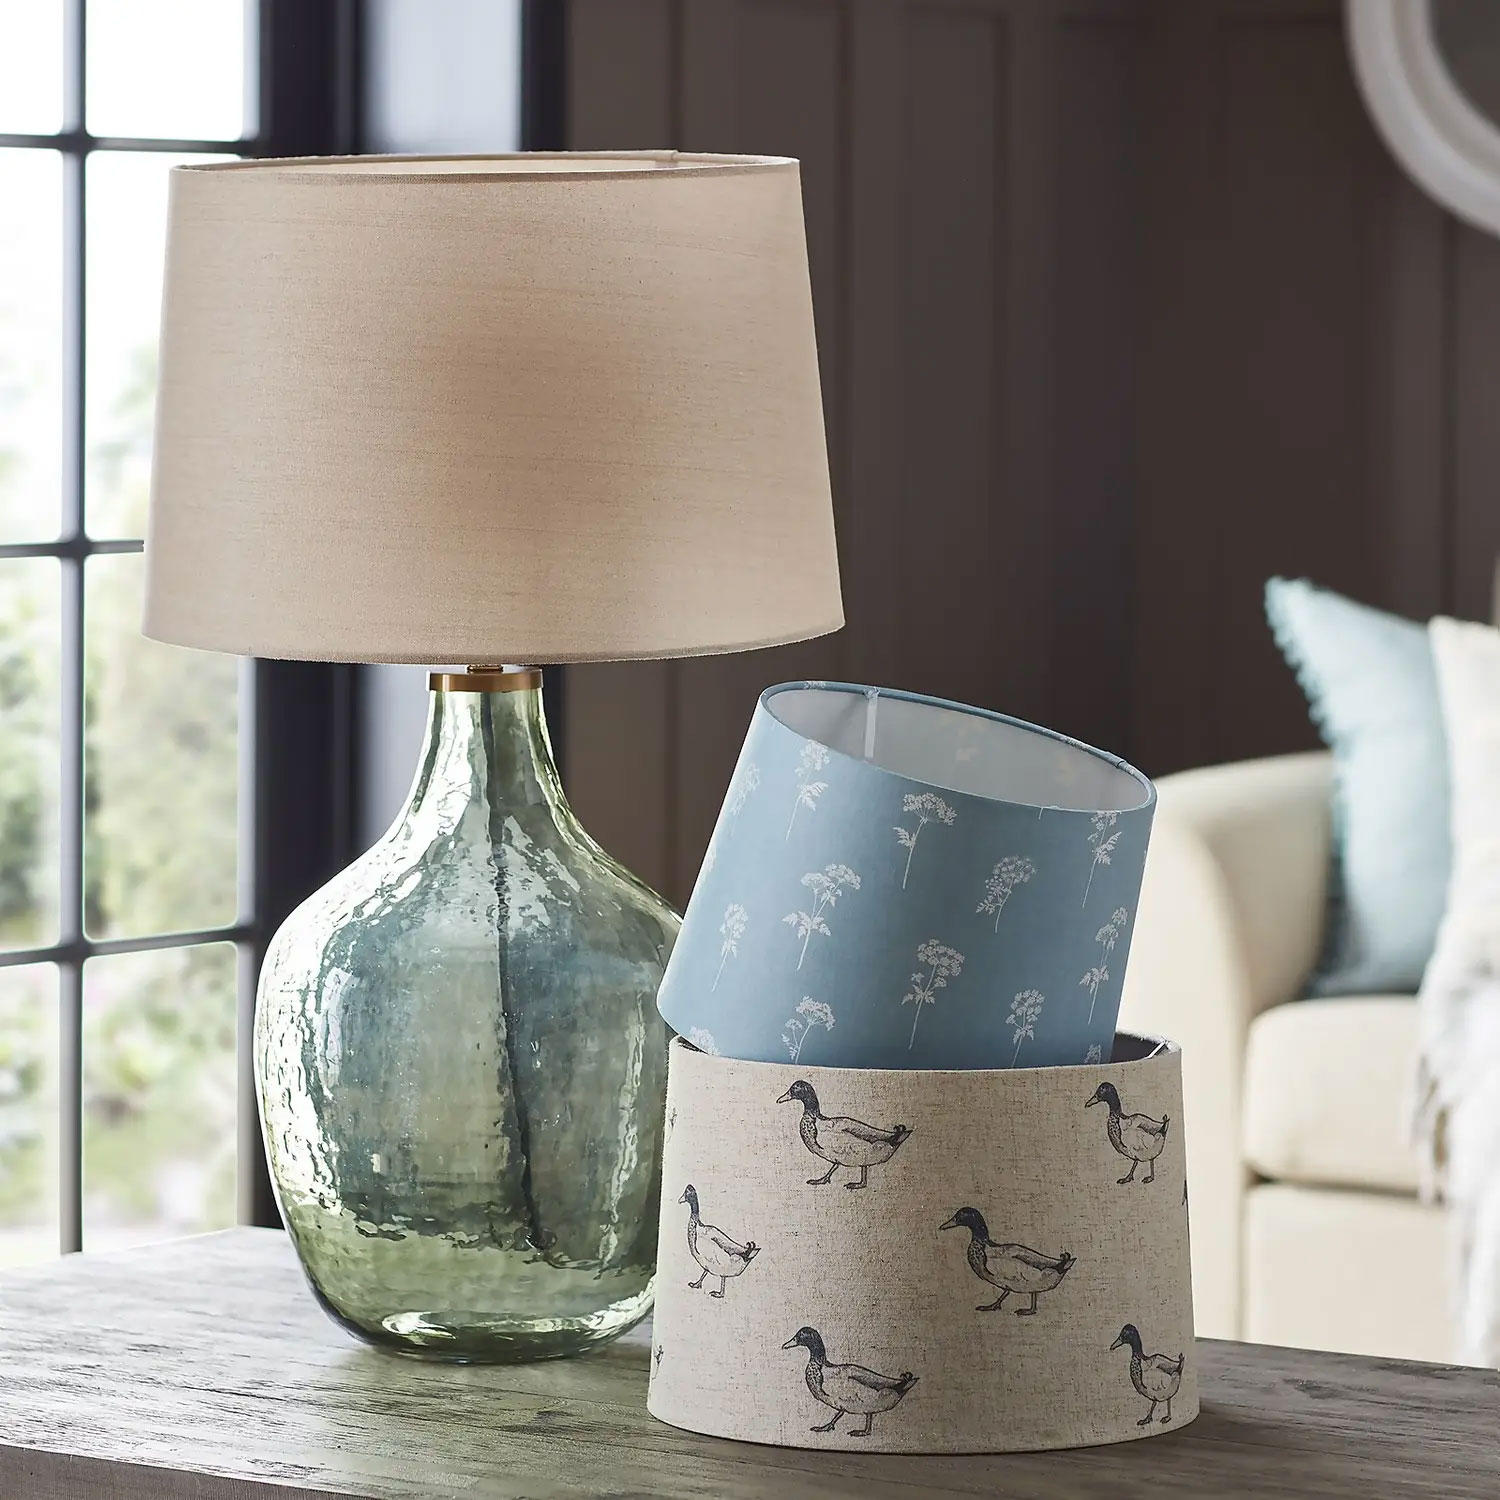 Country Living lampshades in three sizes and colours